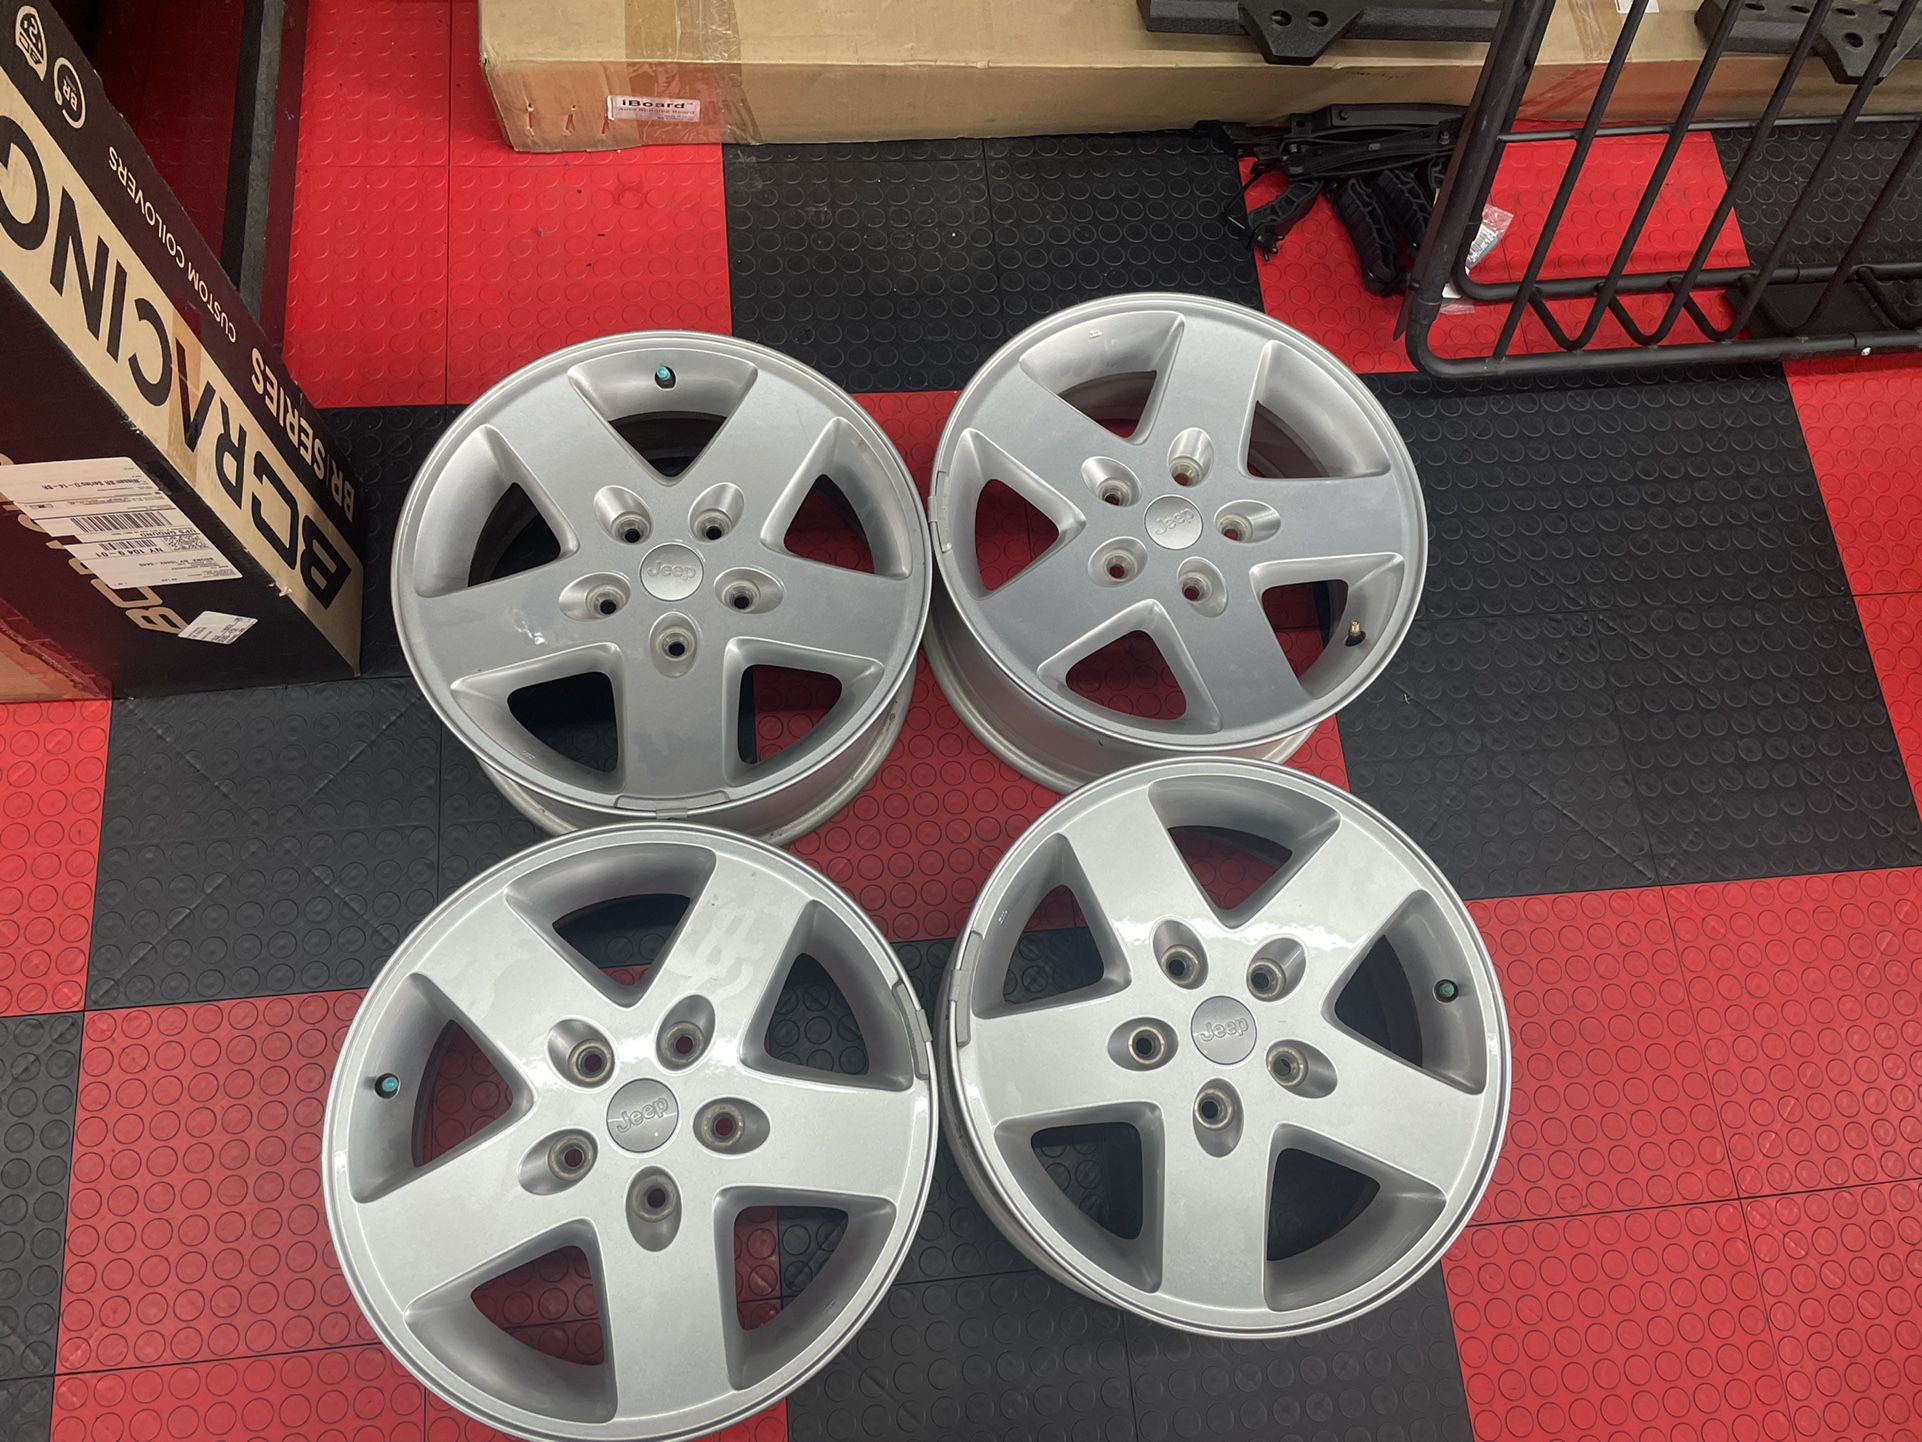  Jeep Wrangler Rims for Sale in The Bronx, NY - OfferUp